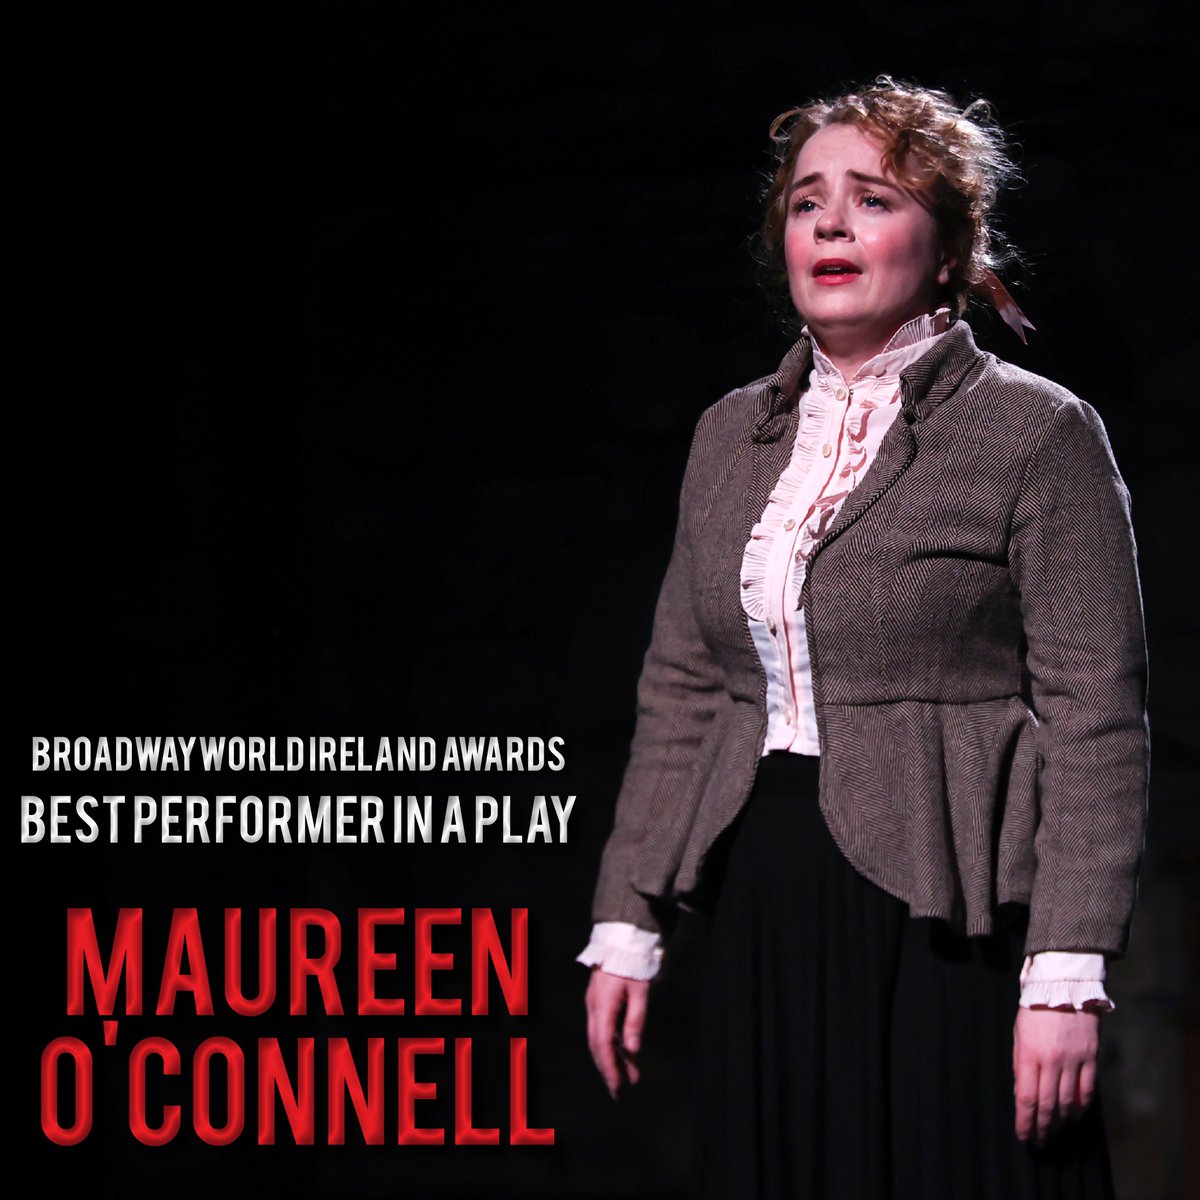 Massive congrats to Maureen O'Connell (@MoOConnell3) for winning @BroadwayWorld Ireland's Best Performer in a Play for The Devil Himself! Thanks to everyone who voted. We couldn't be prouder! @smockalley